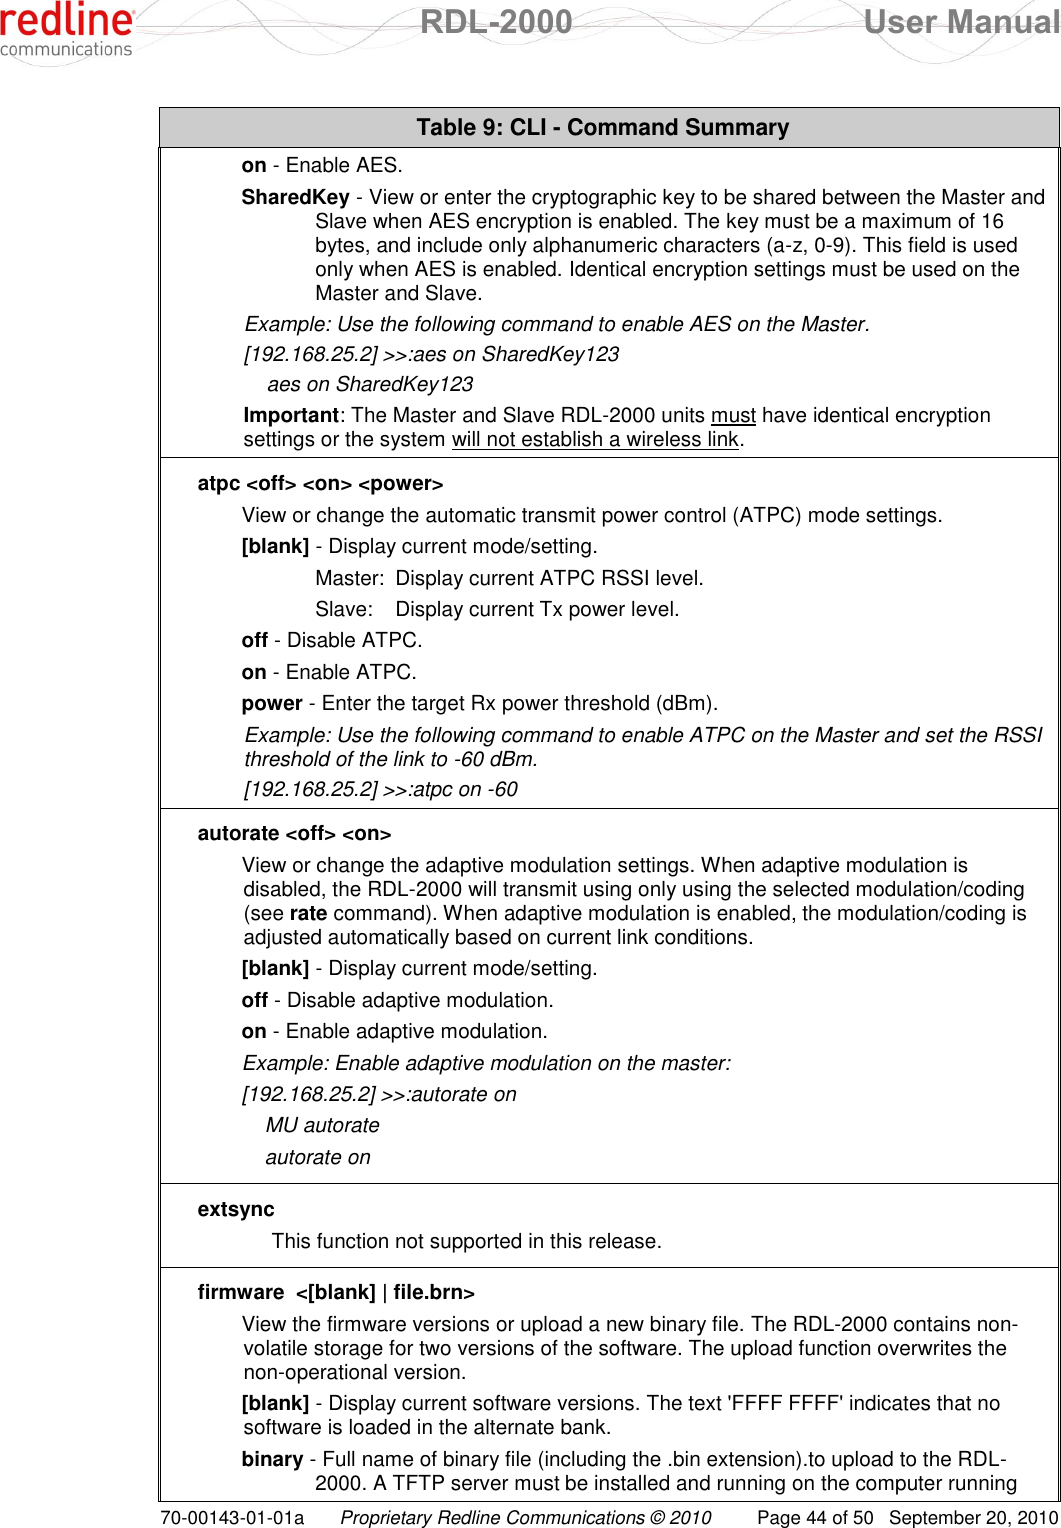  RDL-2000  User Manual 70-00143-01-01a Proprietary Redline Communications © 2010  Page 44 of 50  September 20, 2010 Table 9: CLI - Command Summary on - Enable AES. SharedKey - View or enter the cryptographic key to be shared between the Master and Slave when AES encryption is enabled. The key must be a maximum of 16 bytes, and include only alphanumeric characters (a-z, 0-9). This field is used only when AES is enabled. Identical encryption settings must be used on the Master and Slave. Example: Use the following command to enable AES on the Master. [192.168.25.2] &gt;&gt;:aes on SharedKey123     aes on SharedKey123 Important: The Master and Slave RDL-2000 units must have identical encryption settings or the system will not establish a wireless link. atpc &lt;off&gt; &lt;on&gt; &lt;power&gt; View or change the automatic transmit power control (ATPC) mode settings. [blank] - Display current mode/setting.   Master:  Display current ATPC RSSI level.   Slave:  Display current Tx power level. off - Disable ATPC. on - Enable ATPC. power - Enter the target Rx power threshold (dBm). Example: Use the following command to enable ATPC on the Master and set the RSSI threshold of the link to -60 dBm. [192.168.25.2] &gt;&gt;:atpc on -60 autorate &lt;off&gt; &lt;on&gt; View or change the adaptive modulation settings. When adaptive modulation is disabled, the RDL-2000 will transmit using only using the selected modulation/coding (see rate command). When adaptive modulation is enabled, the modulation/coding is adjusted automatically based on current link conditions. [blank] - Display current mode/setting. off - Disable adaptive modulation. on - Enable adaptive modulation. Example: Enable adaptive modulation on the master: [192.168.25.2] &gt;&gt;:autorate on     MU autorate     autorate on extsync  This function not supported in this release. firmware  &lt;[blank] | file.brn&gt; View the firmware versions or upload a new binary file. The RDL-2000 contains non-volatile storage for two versions of the software. The upload function overwrites the non-operational version. [blank] - Display current software versions. The text &apos;FFFF FFFF&apos; indicates that no software is loaded in the alternate bank. binary - Full name of binary file (including the .bin extension).to upload to the RDL-2000. A TFTP server must be installed and running on the computer running 